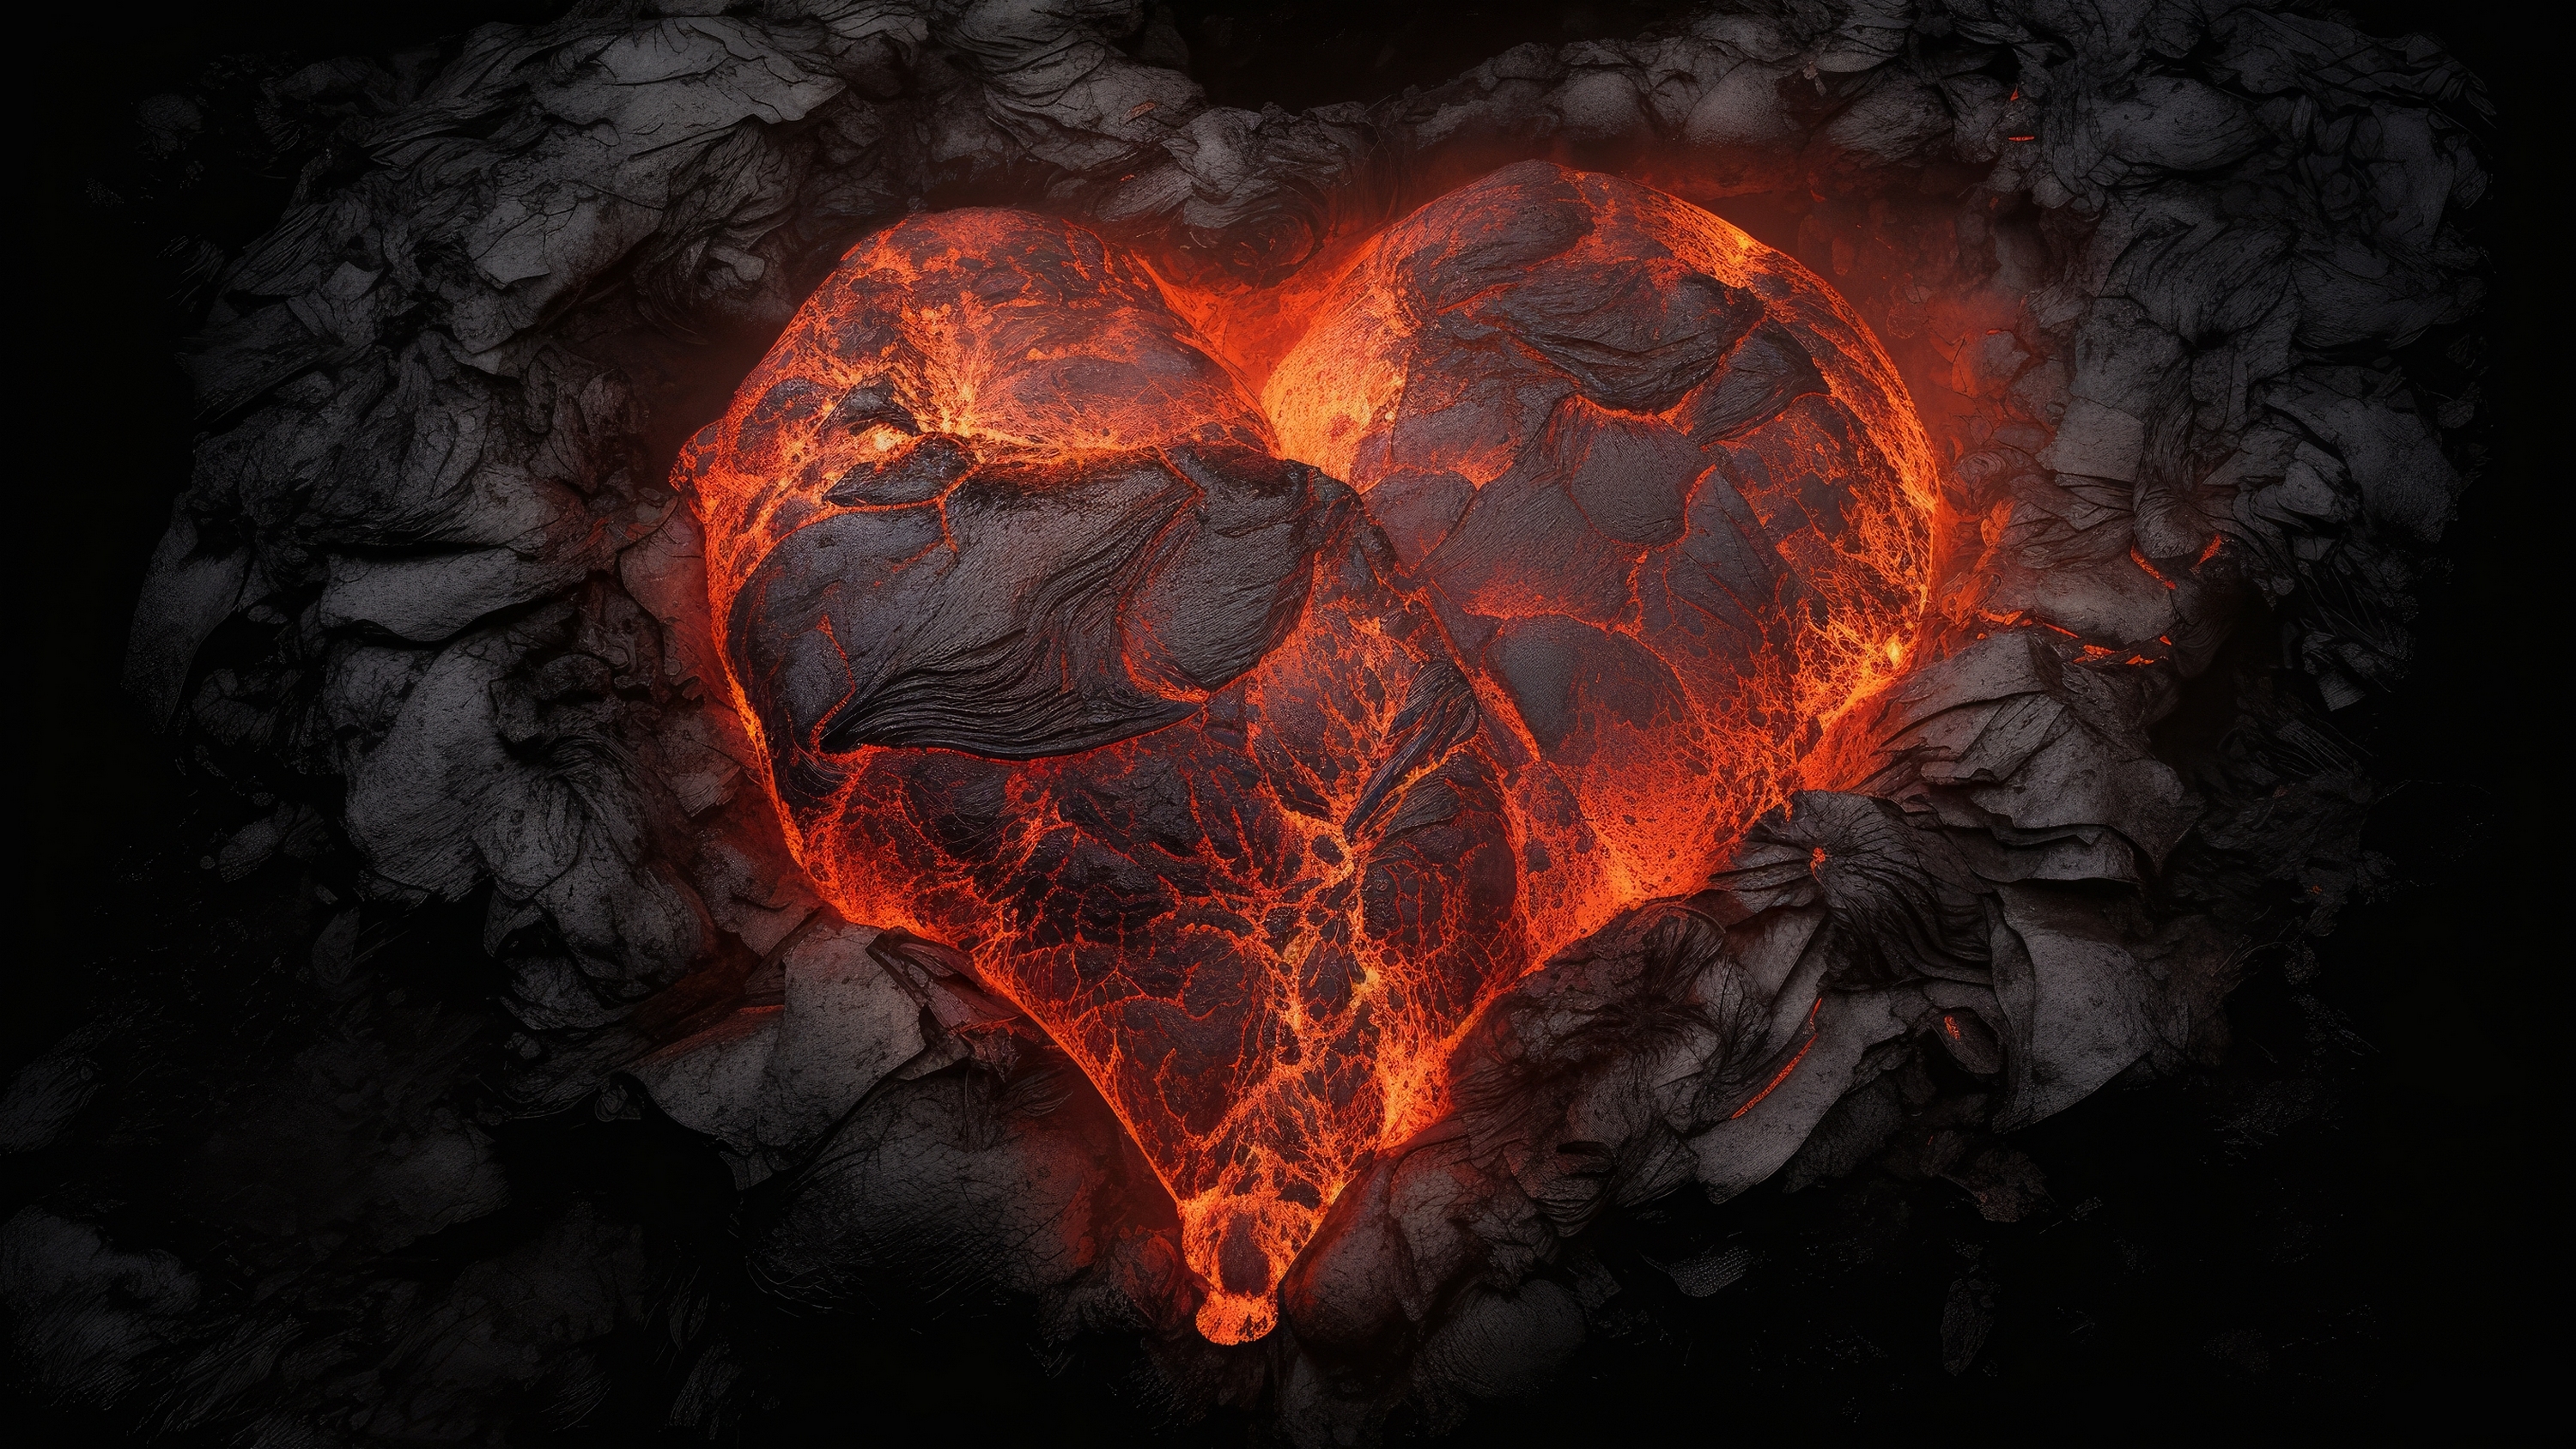 The heart of the volcano